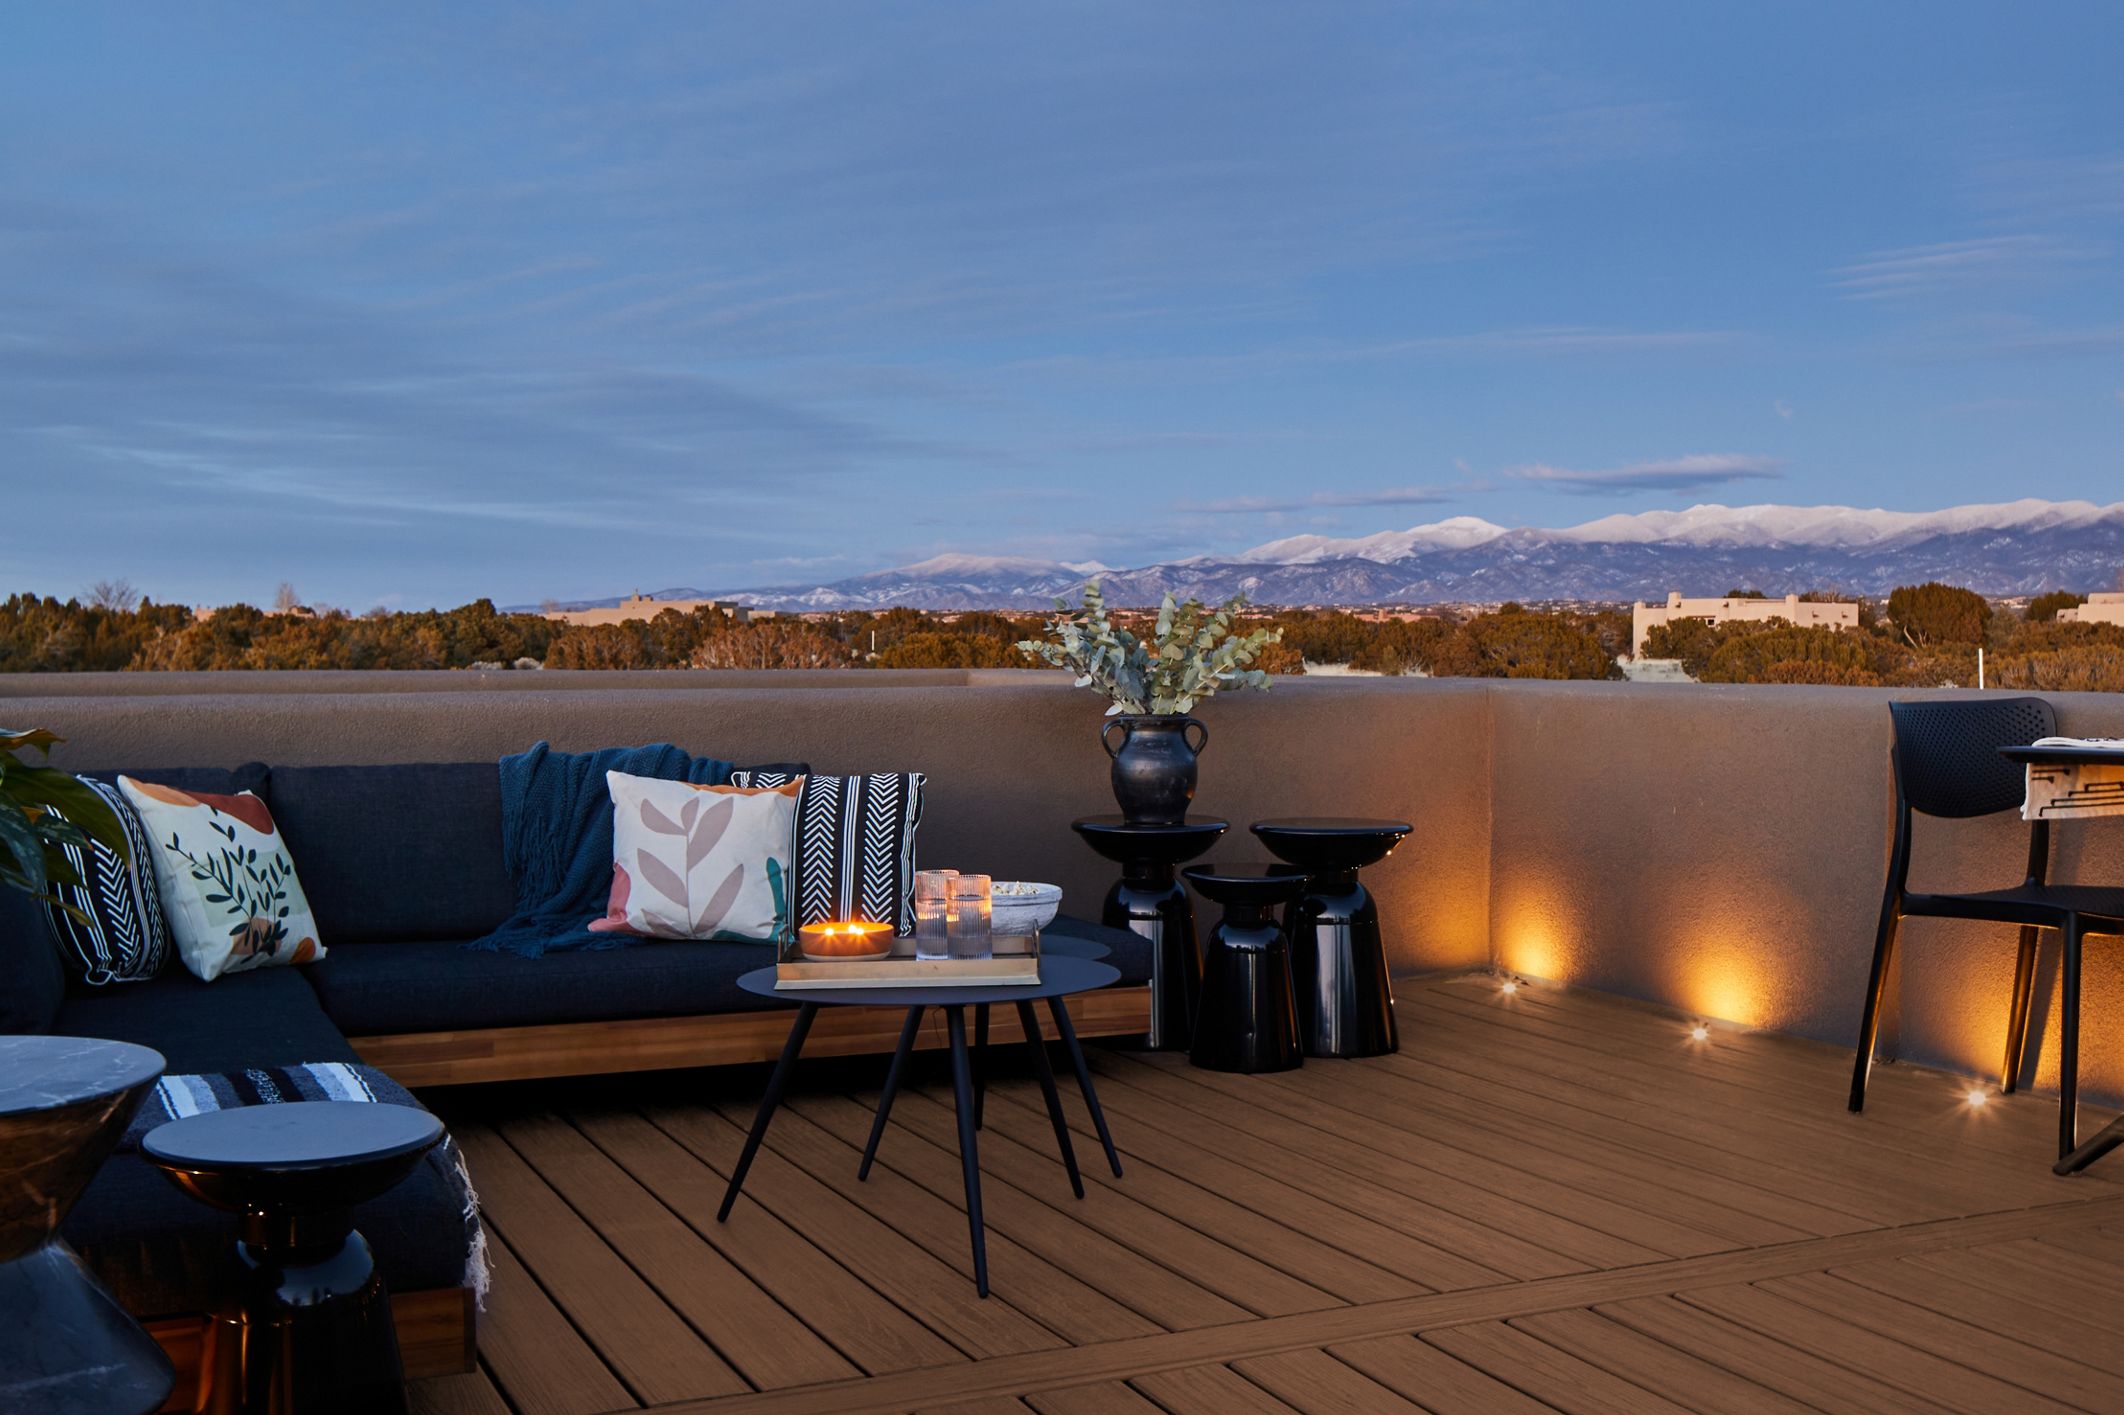 17 Rooftop Deck Ideas And Designs | Trex | Trex